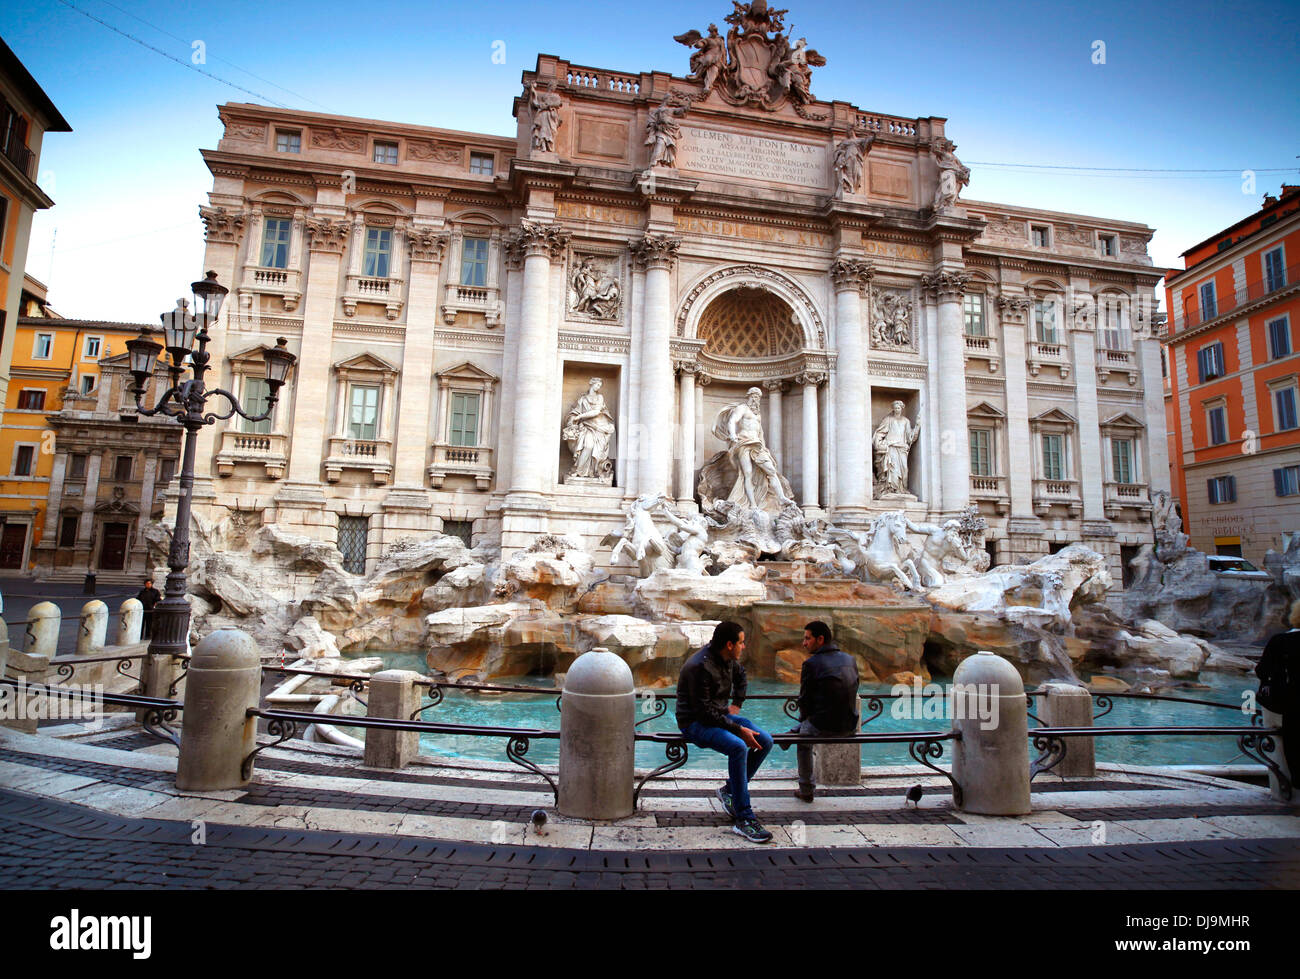 Early morning tourist free at the Trevi Fountain in Rome, Italy. Stock Photo